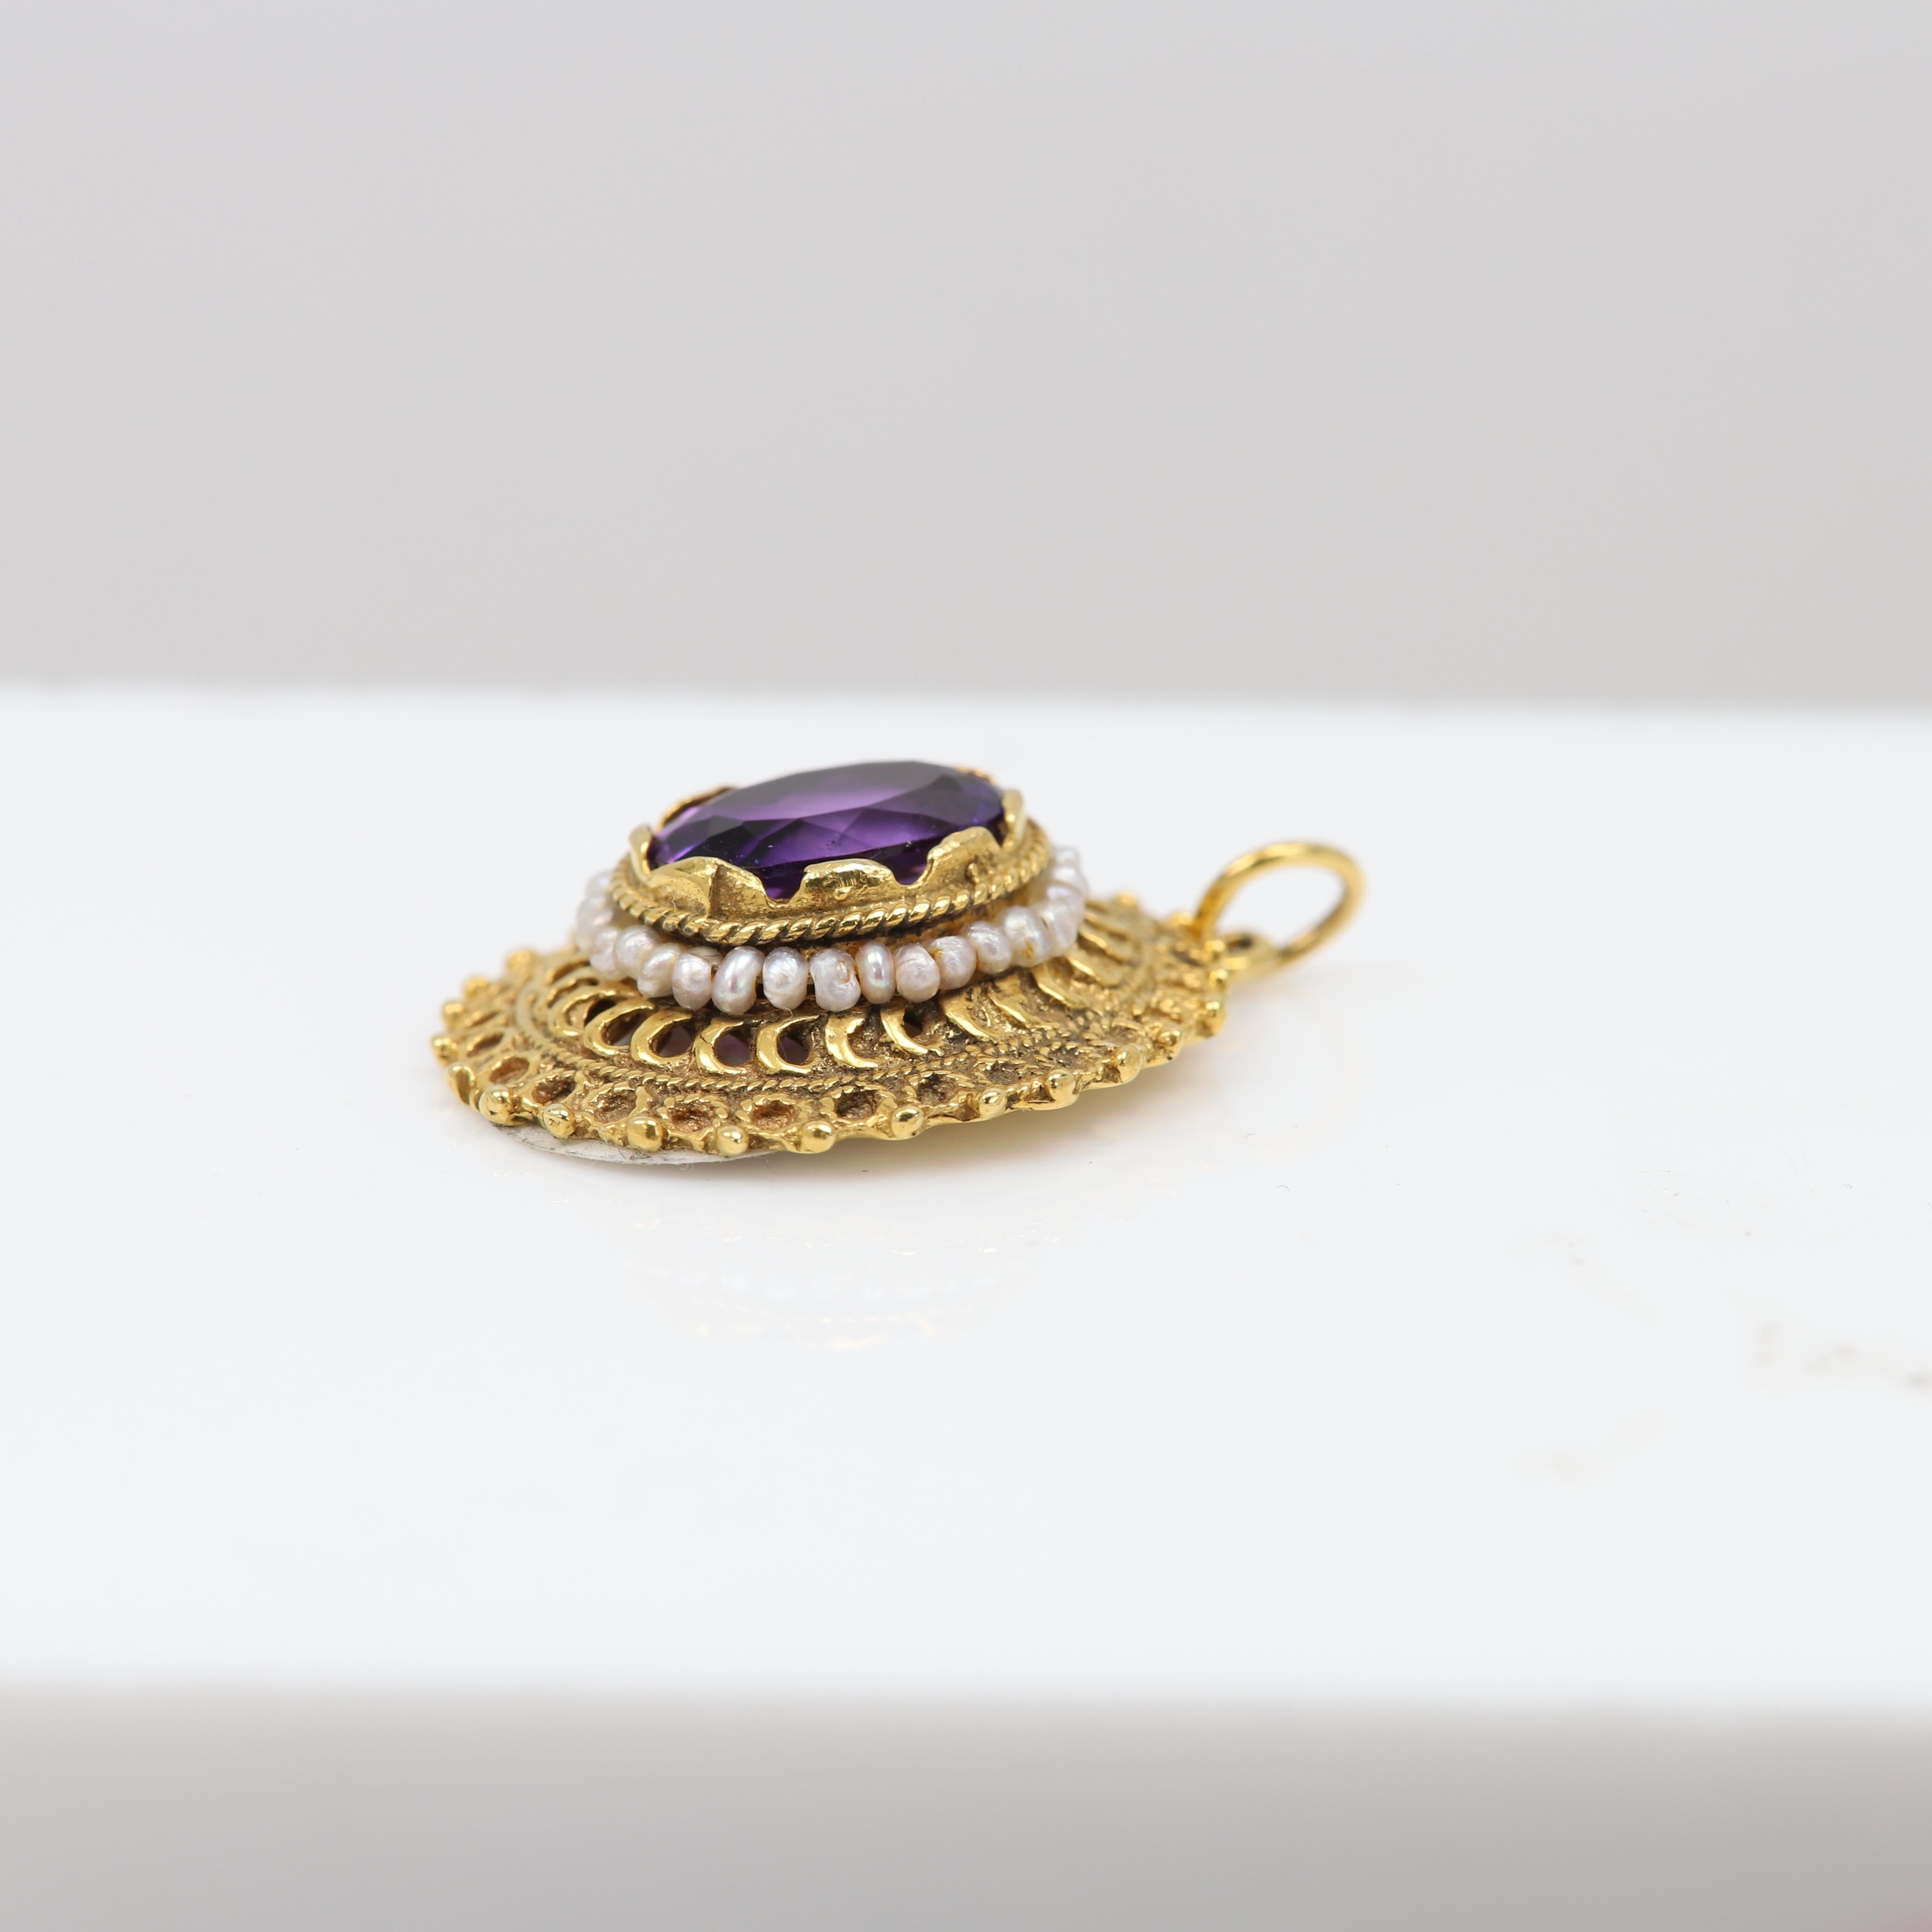 An old antique pendant made with 
a brilliant oval amethyst.
the hand made craft workmanship style is clearly visible in this pendant 
with the beautiful art work around the stone.
Pendant size: approx. 23 x 20 mm
Stone size: 12 x 10 mm
Weight: 4.20